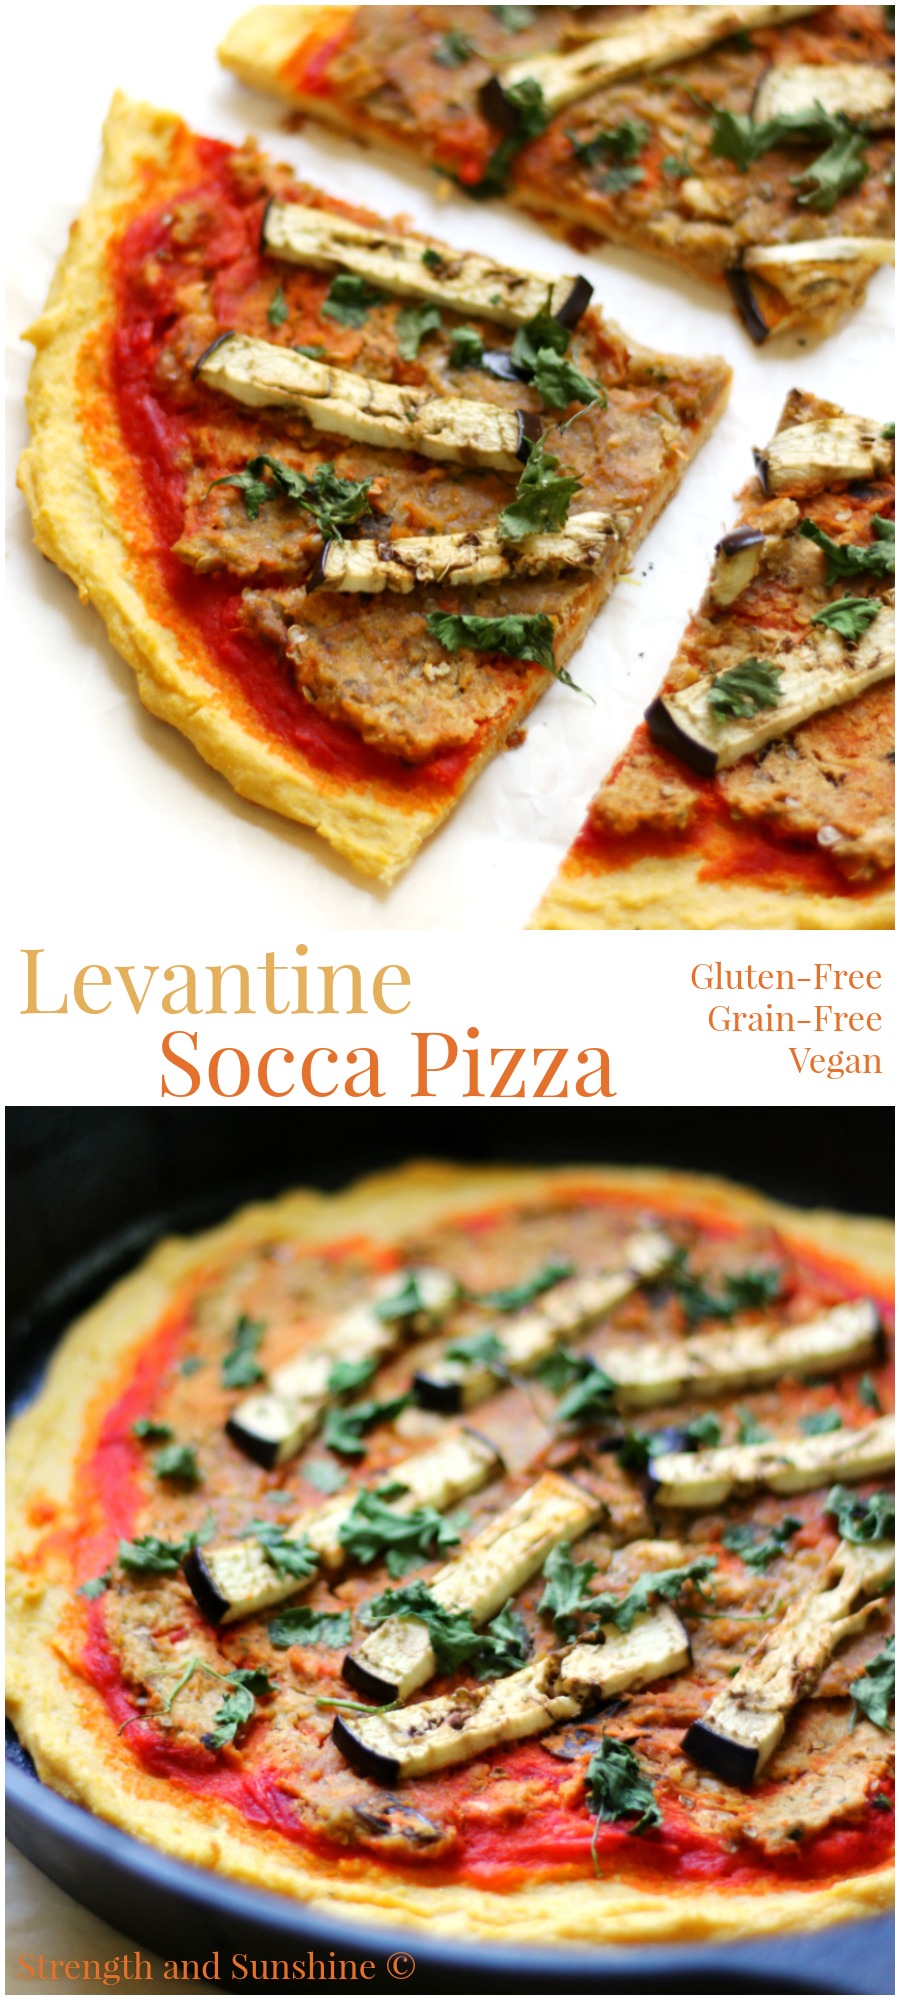 Levantine Socca Pizza | Strength and Sunshine @RebeccaGF666 Combining Levantine flavors to create a delicious gluten-free, grain-free, nut-free, vegan pizza recipe baked in a cast iron skillet! Levantine Socca Pizza is the healthy exotic twist you need to spice up pizza night!